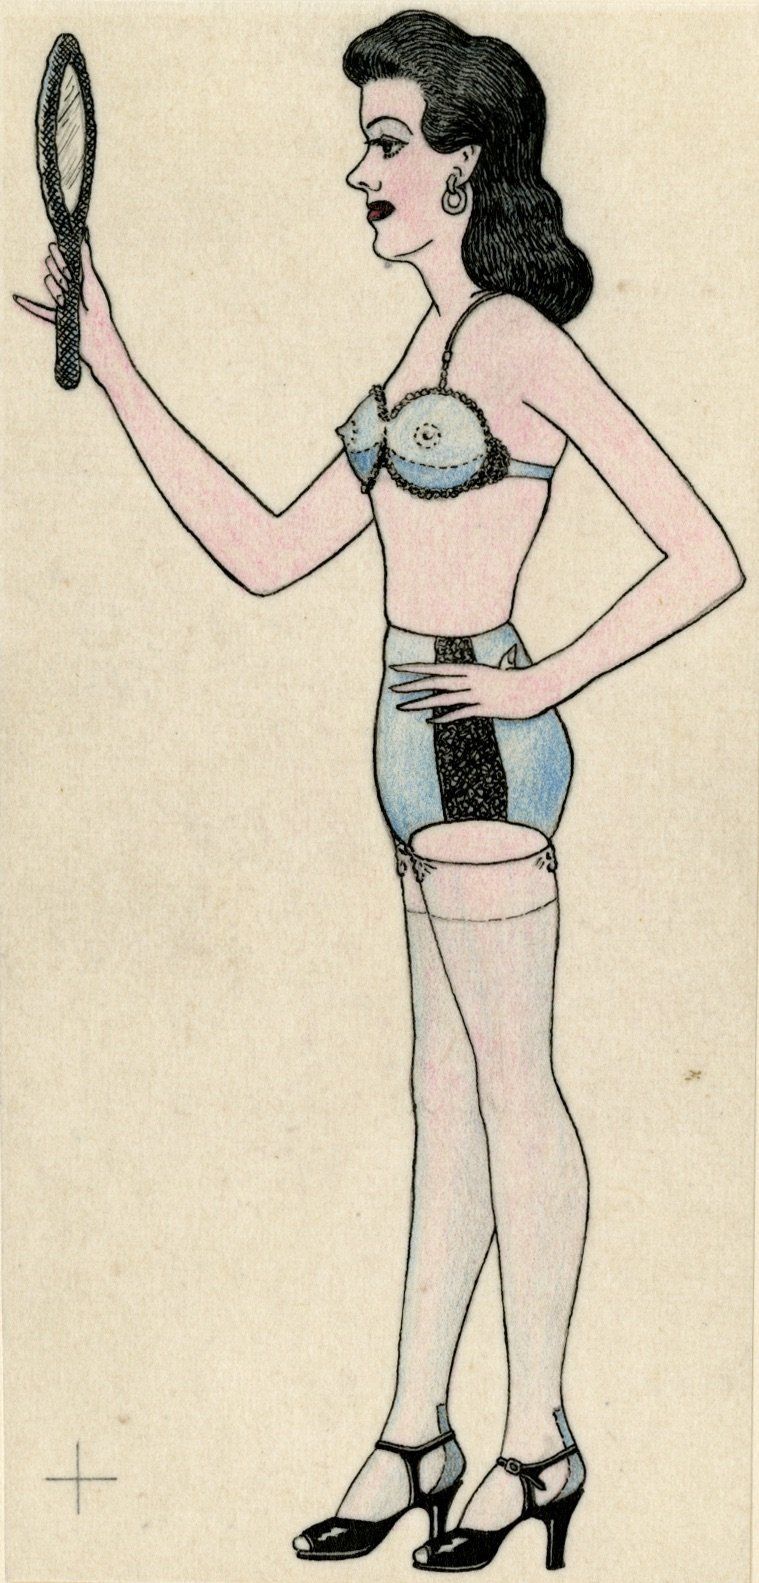 Anonymous, "Man Cross Dressing," Mid 20th century, graphite and colored pencil on paper.